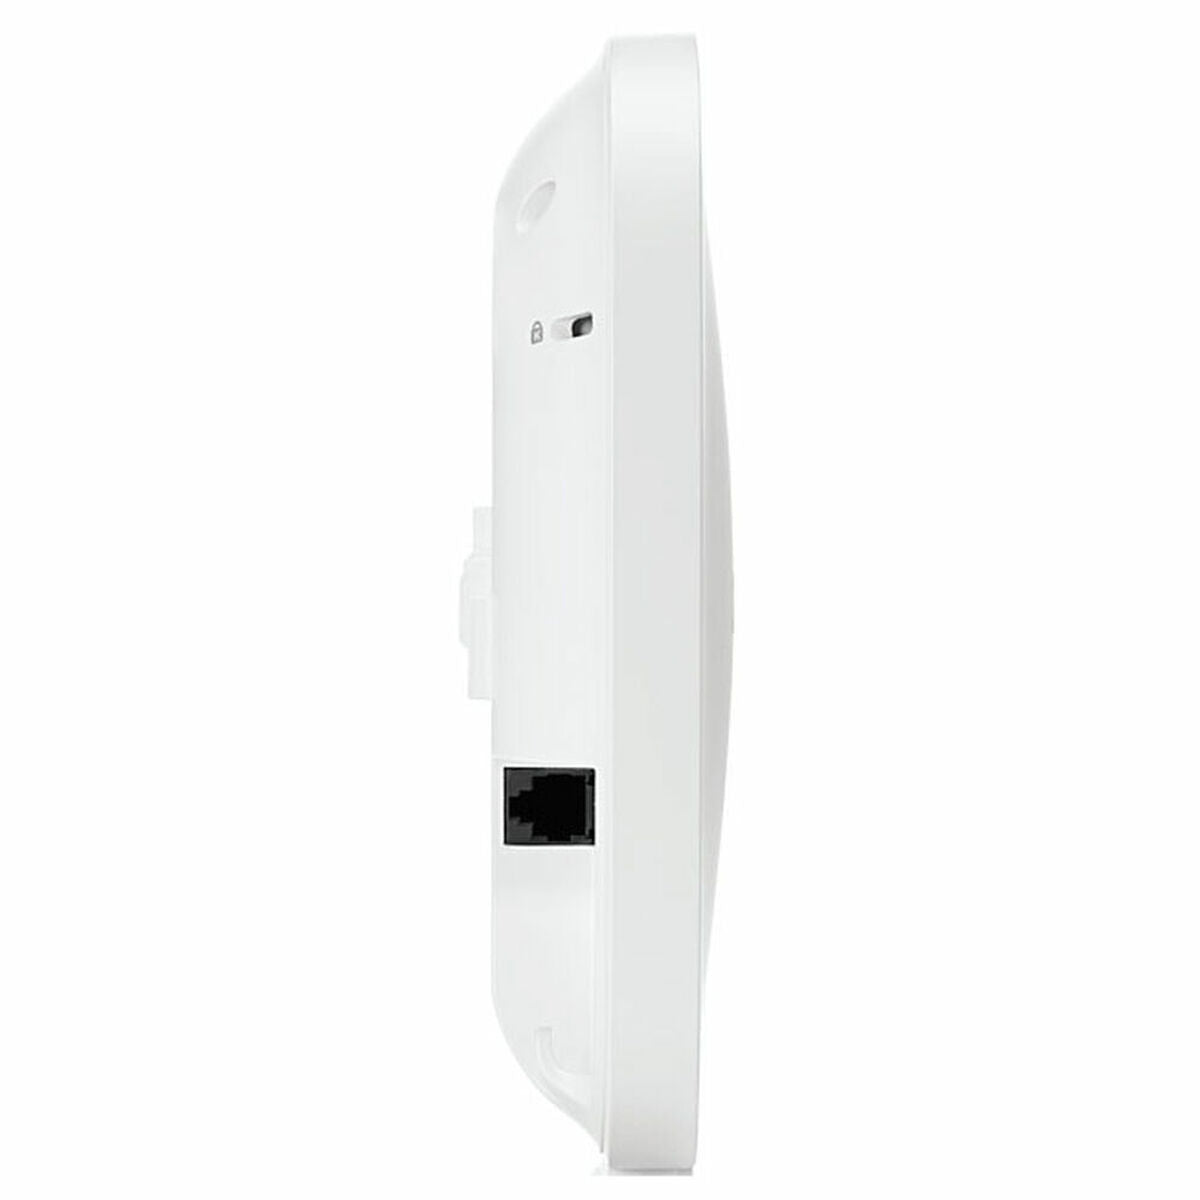 Access point HPE R6M50A               White, HPE, Computing, Network devices, access-point-hpe-r6m50a-white-1, Brand_HPE, category-reference-2609, category-reference-2803, category-reference-2820, category-reference-t-19685, category-reference-t-19914, Condition_NEW, networks/wiring, Price_100 - 200, Teleworking, RiotNook